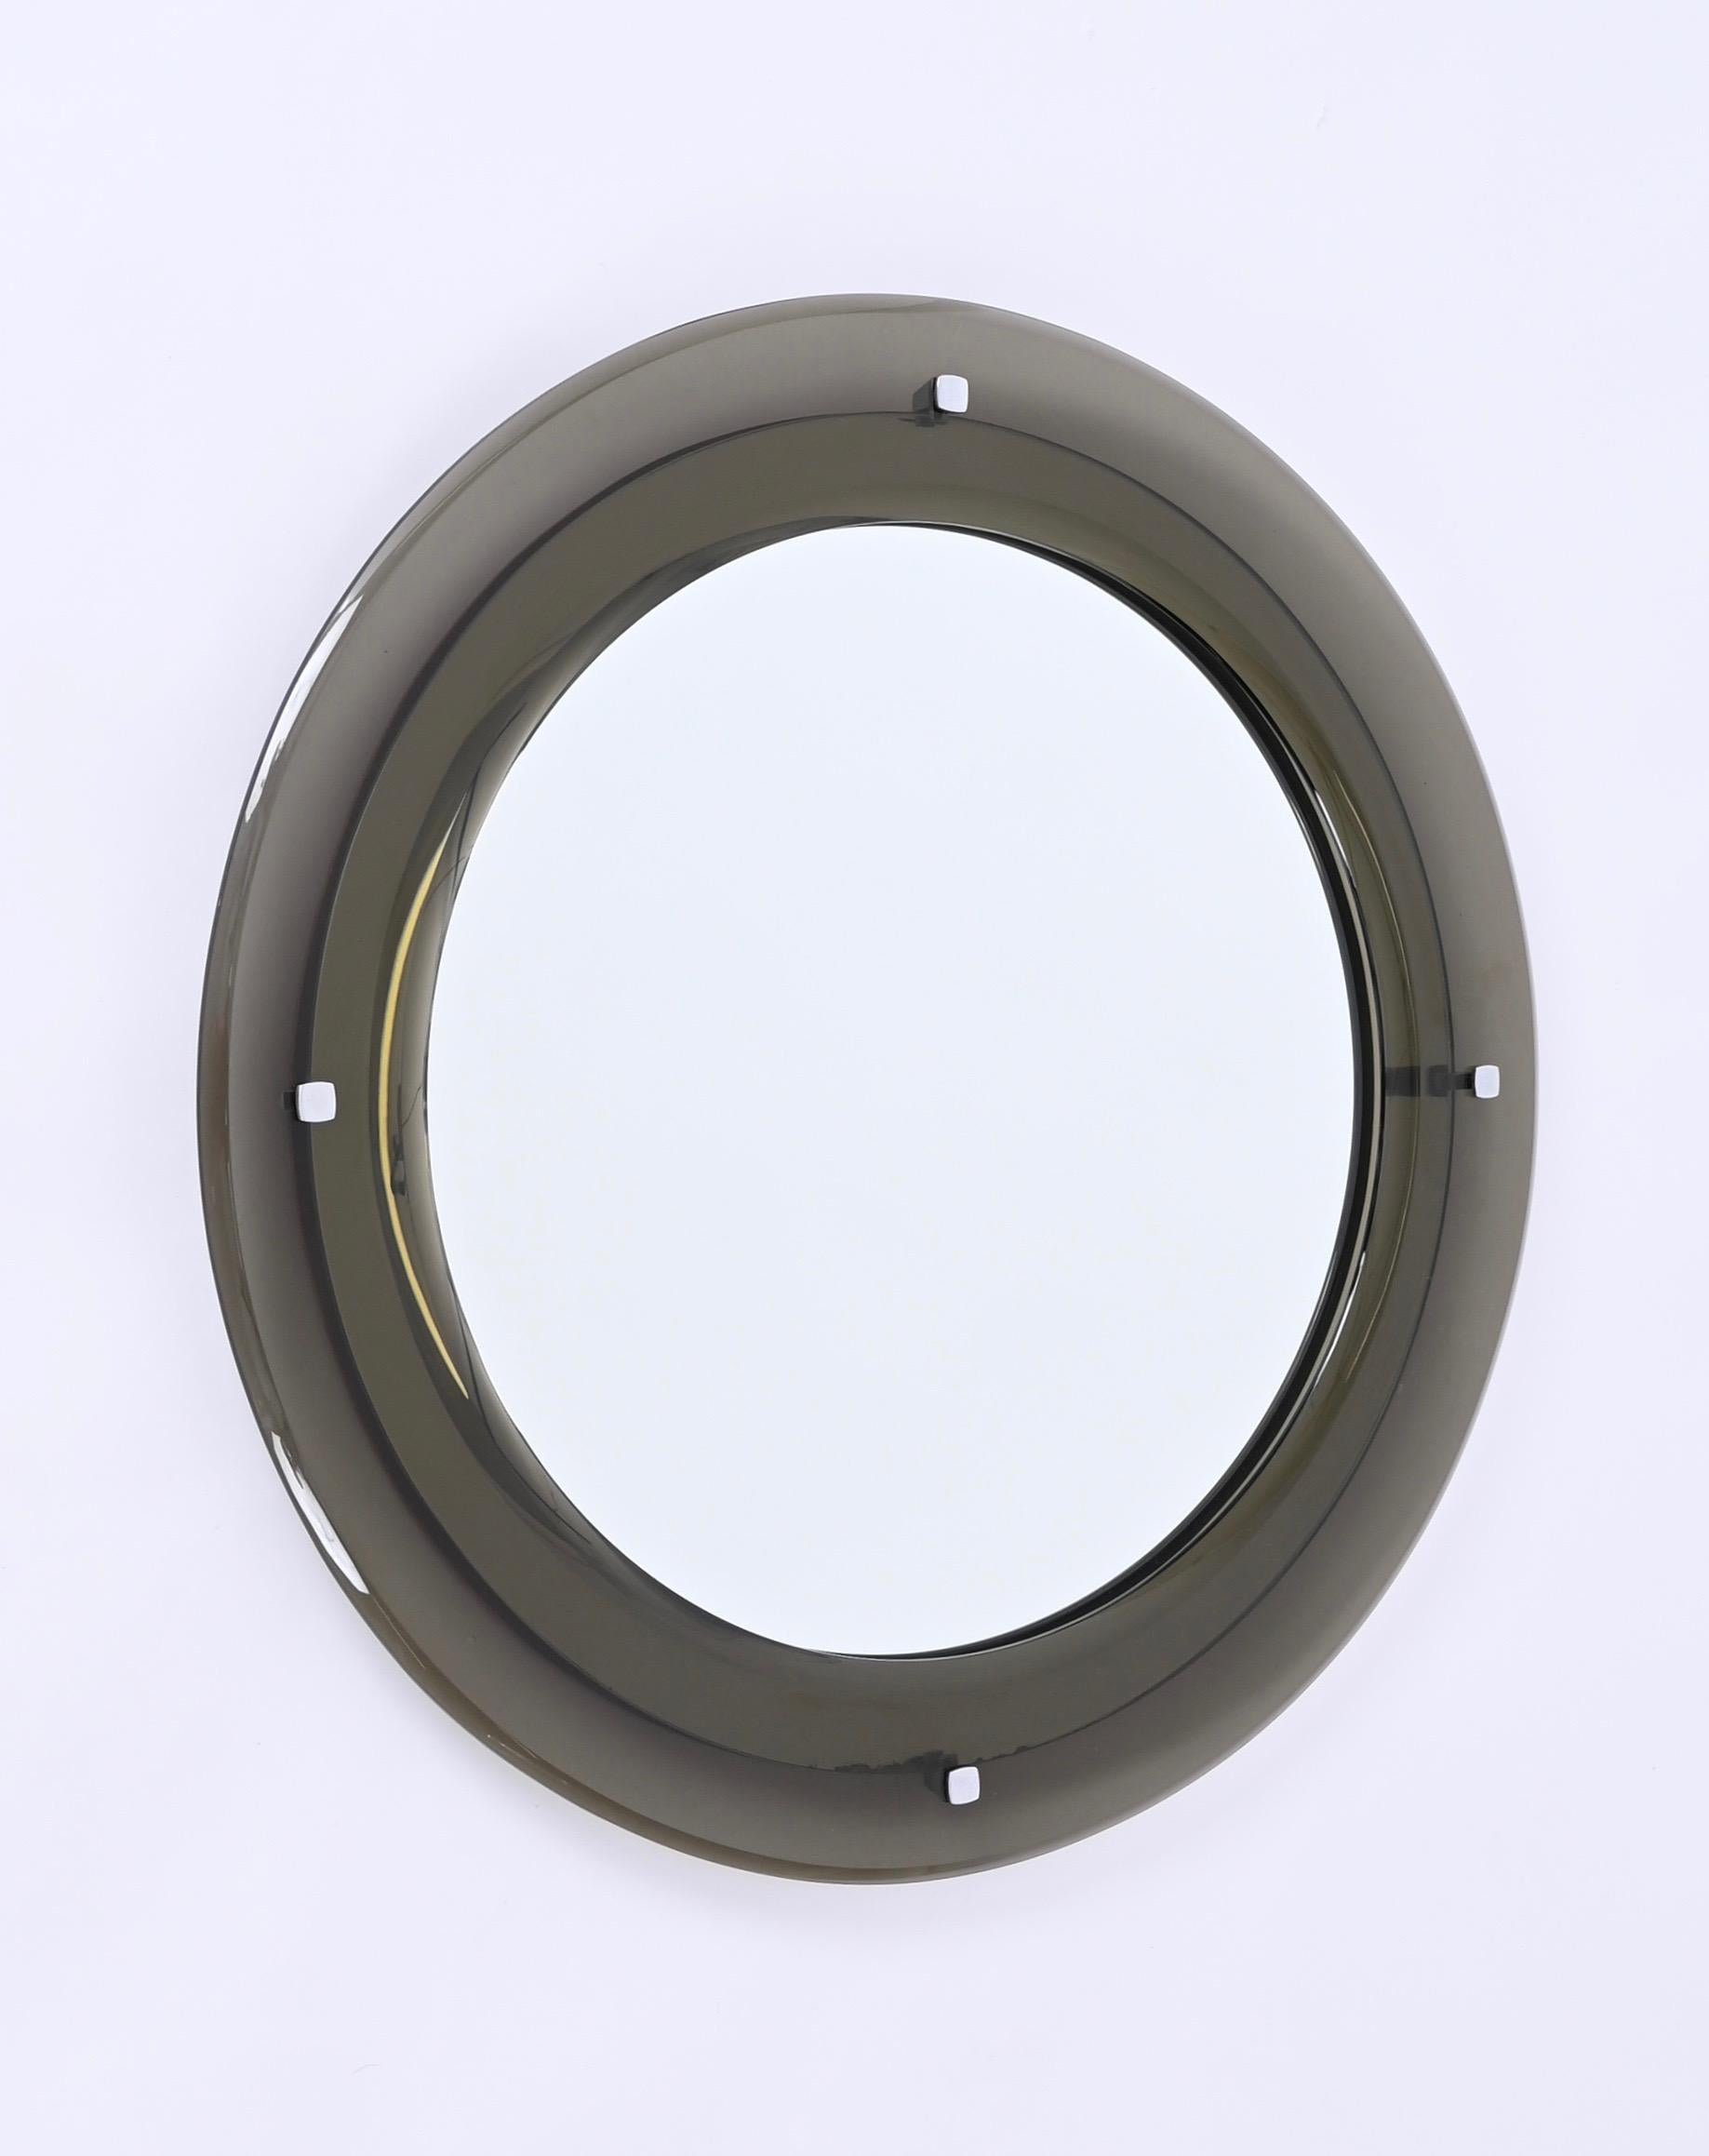 Midcentury Italian Round Mirror with Beveled Smoked Glass by Sena Cristal, 1970s For Sale 5